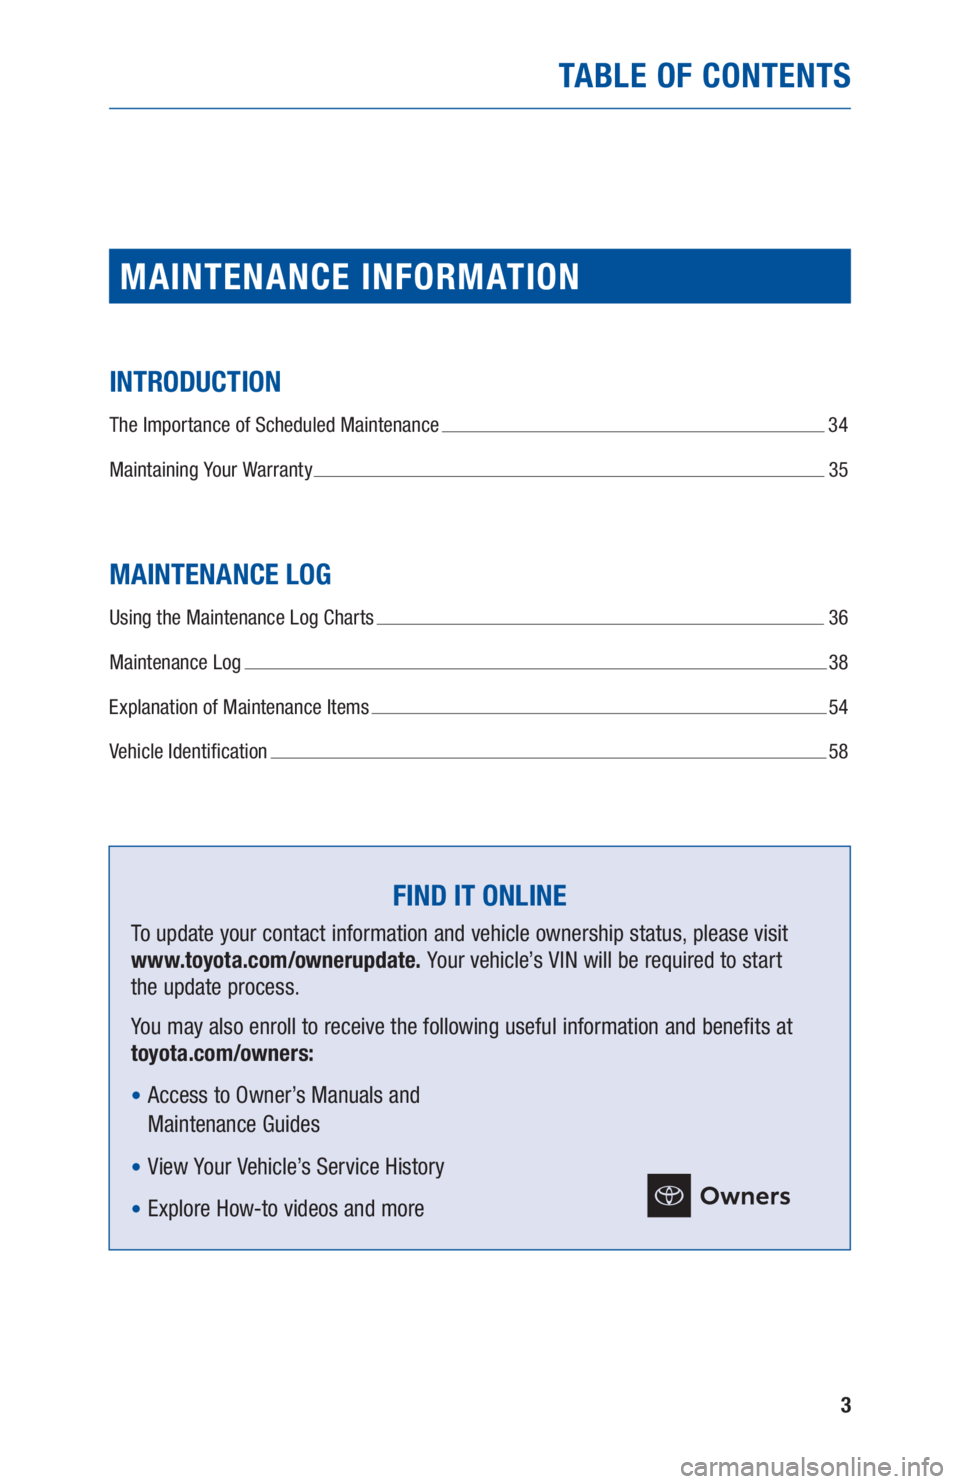 TOYOTA C-HR 2020  Warranties & Maintenance Guides (in English) 3
TABLE OF CONTENTS
MAINTENANCE INFORMATION
INTRODUCTION
The Importance of Scheduled Maintenance  34
Maintaining Your Warranty 
 35
MAINTENANCE LOG
Using the Maintenance Log Charts  36
Maintenance Log